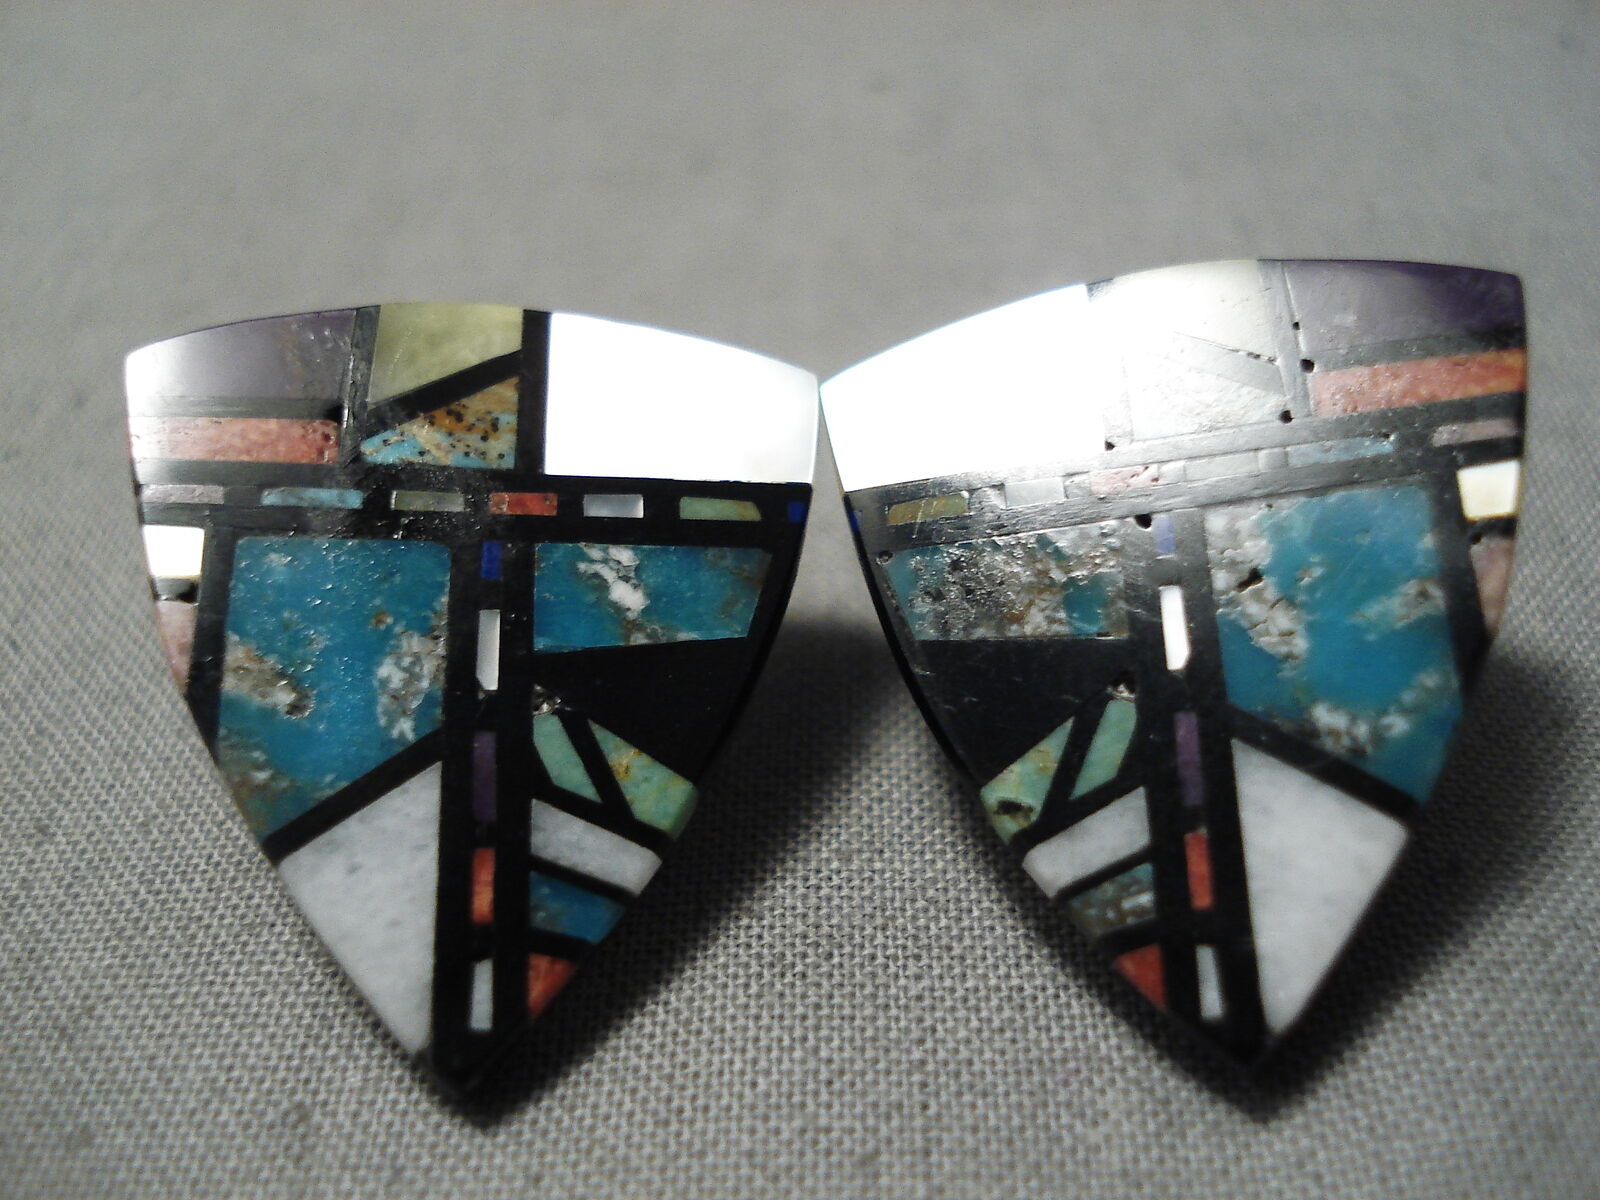 IMPORTANT SANTO DOMINGO INLAY MASTER TURQUOISE STERLING SILVER EARRINGS